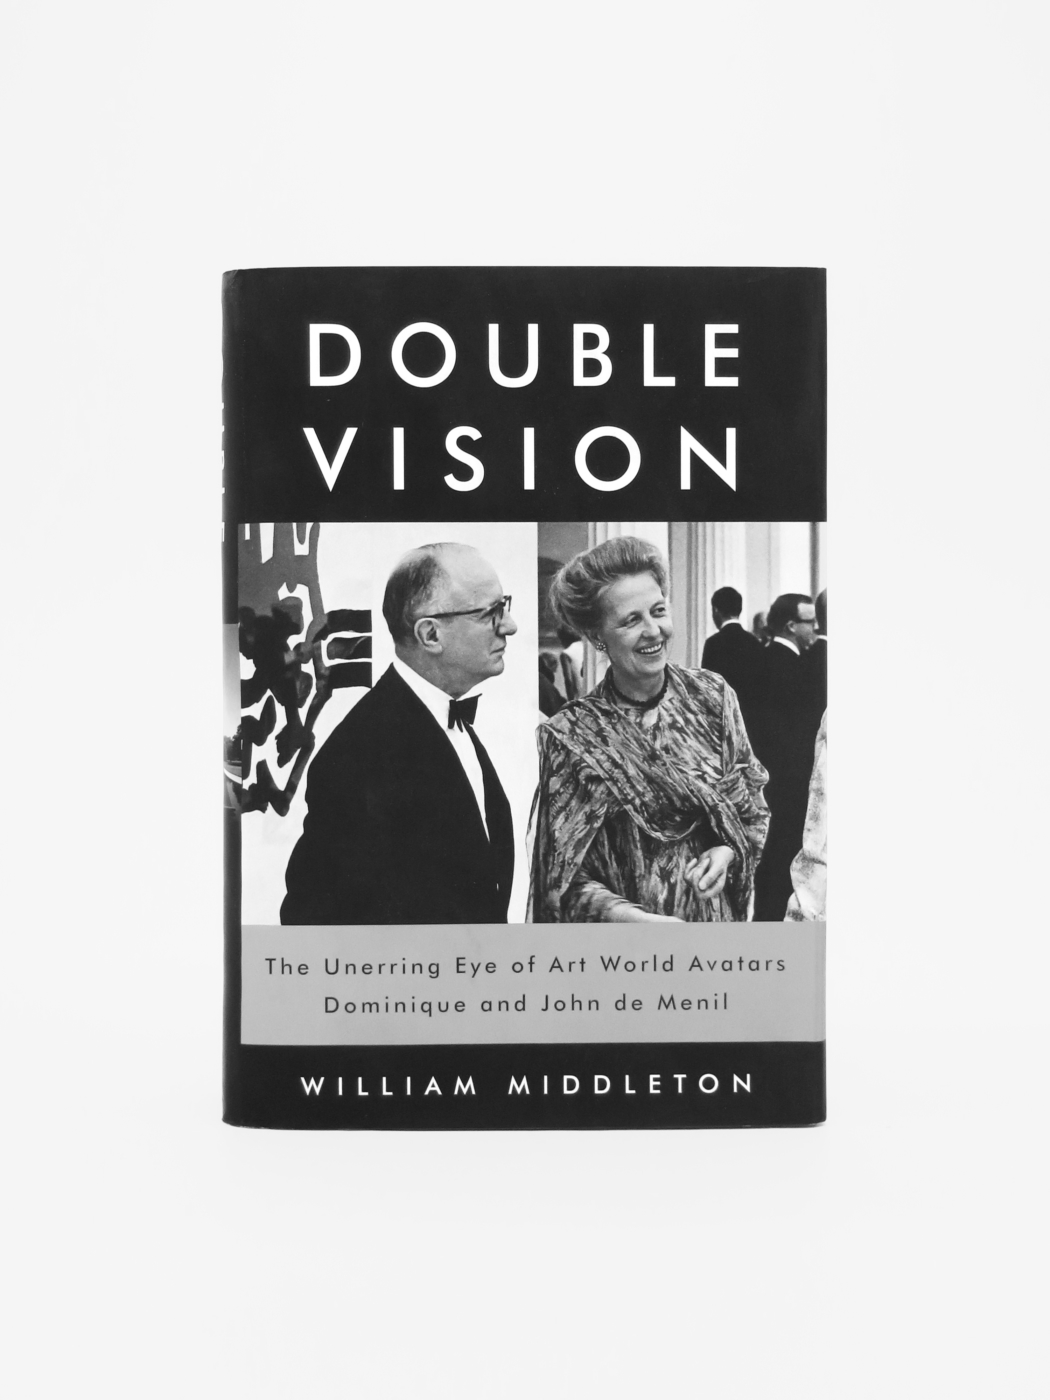 William Middleton, Double Vision